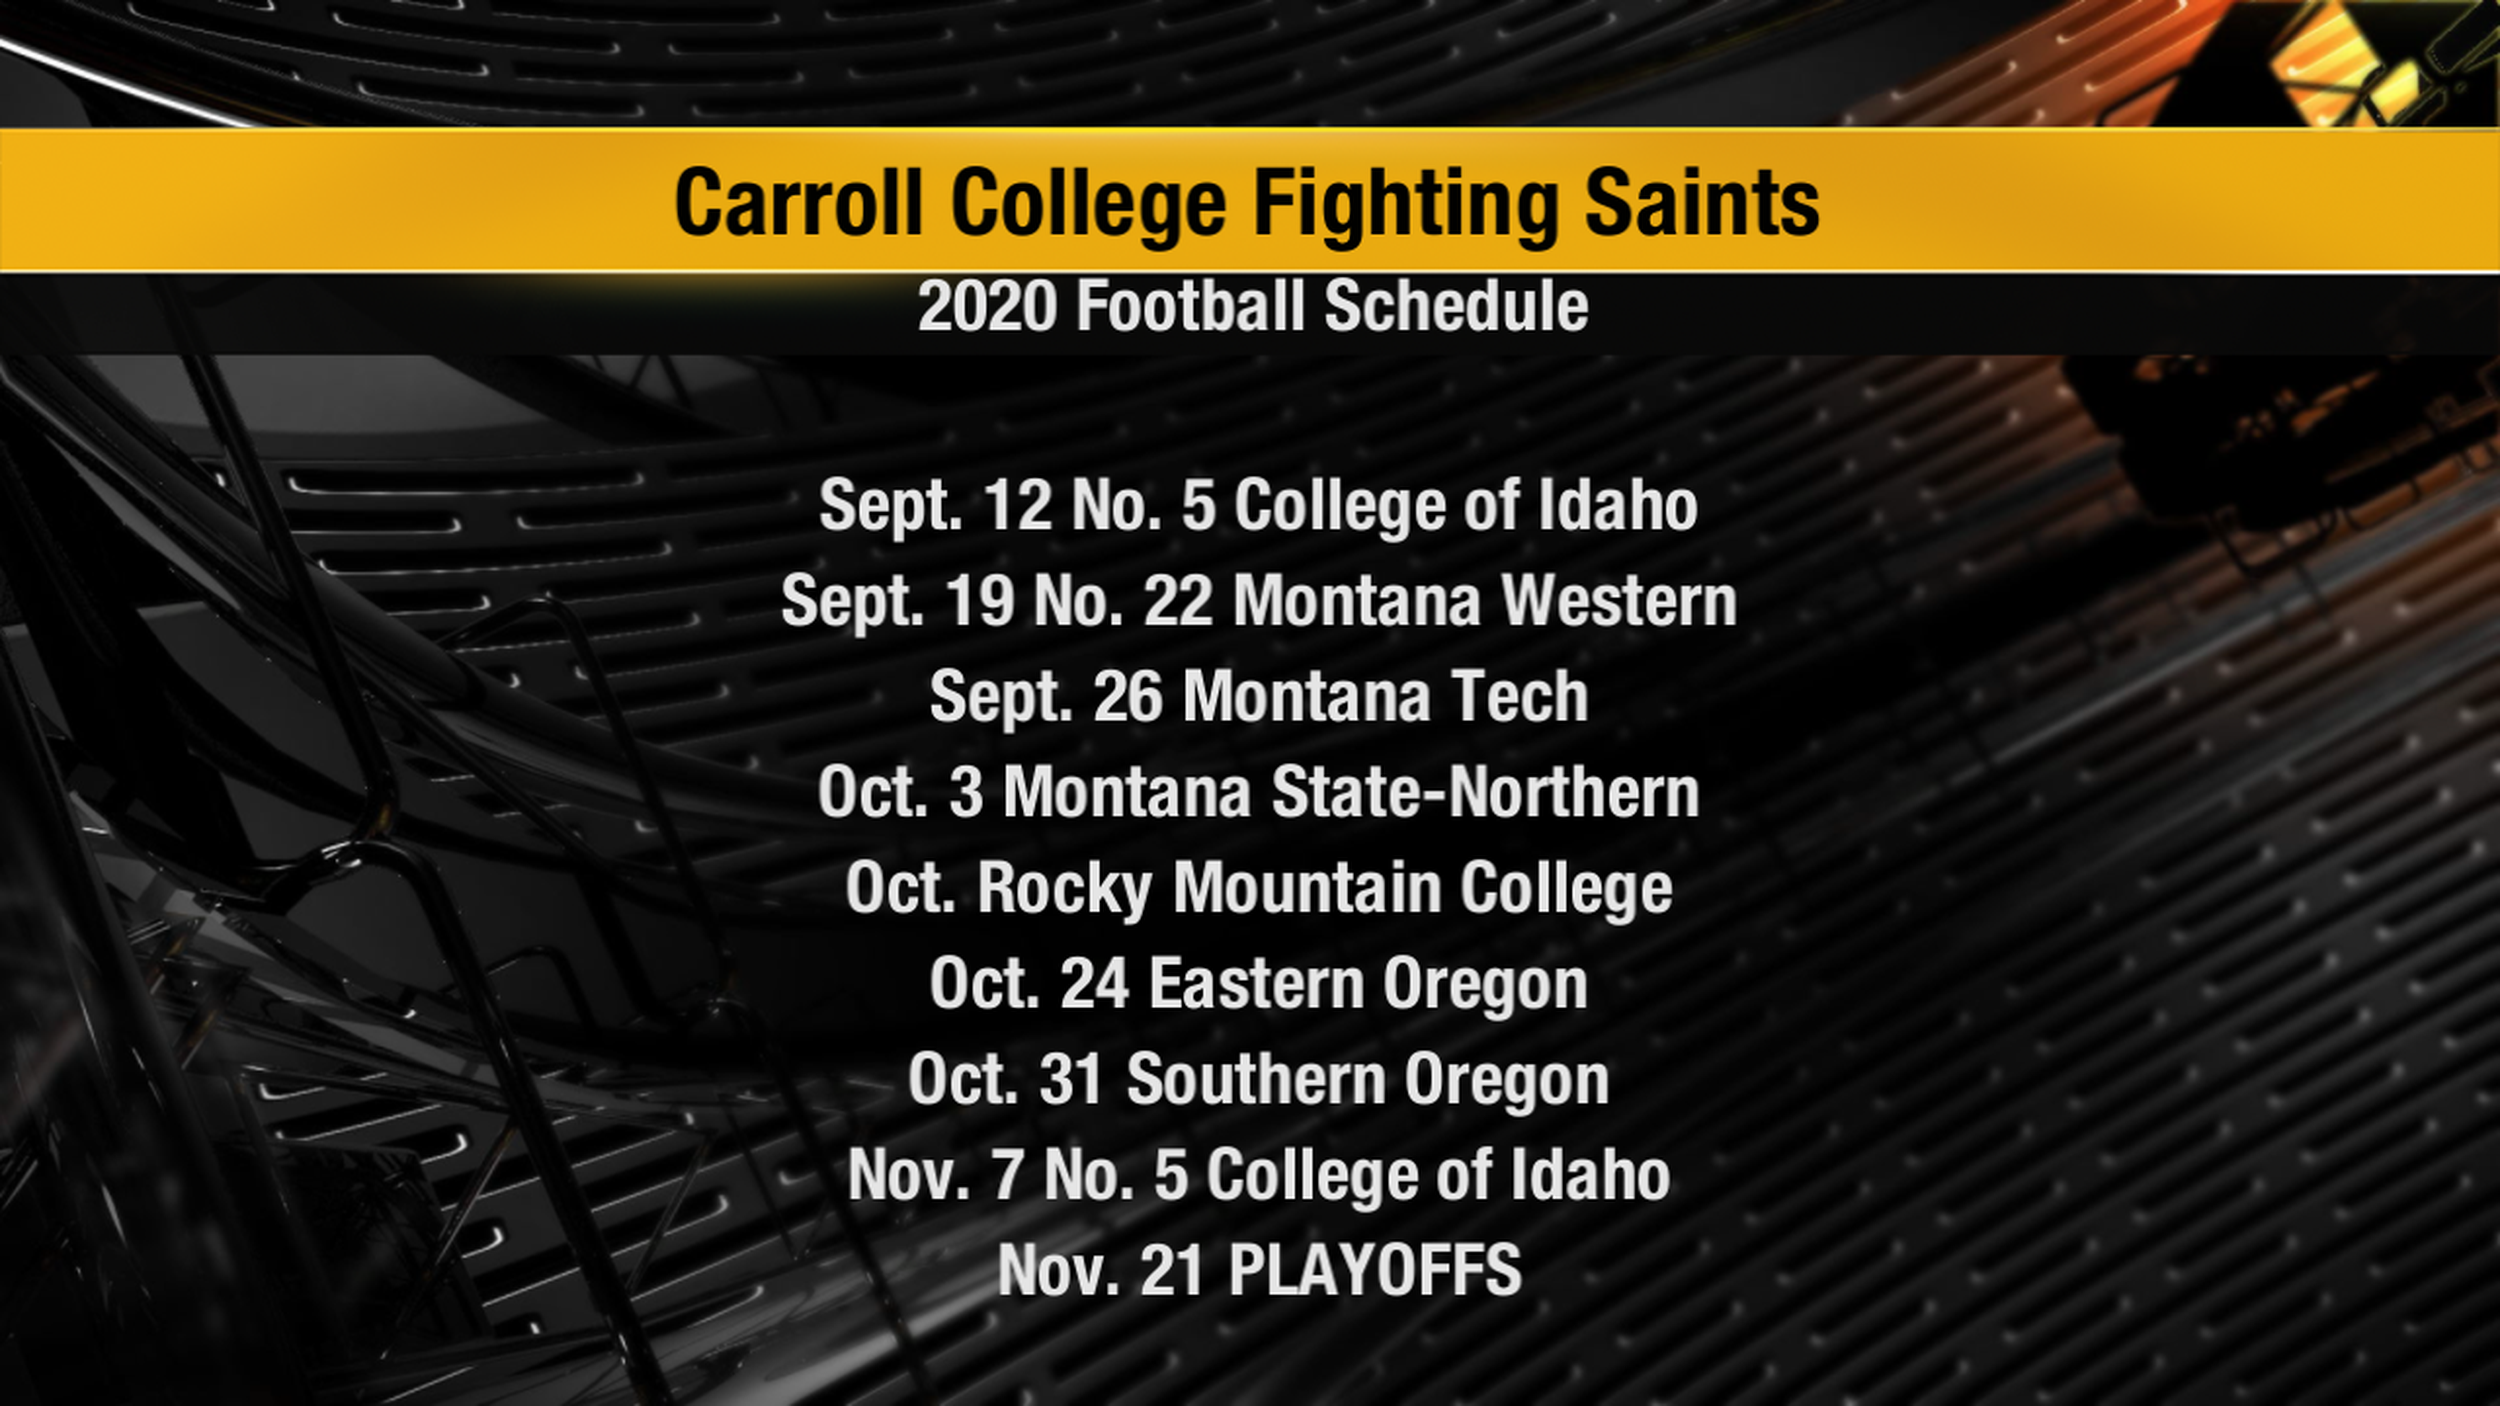 Carroll College Football Schedule | SWX Right Now - Sports for Spokane